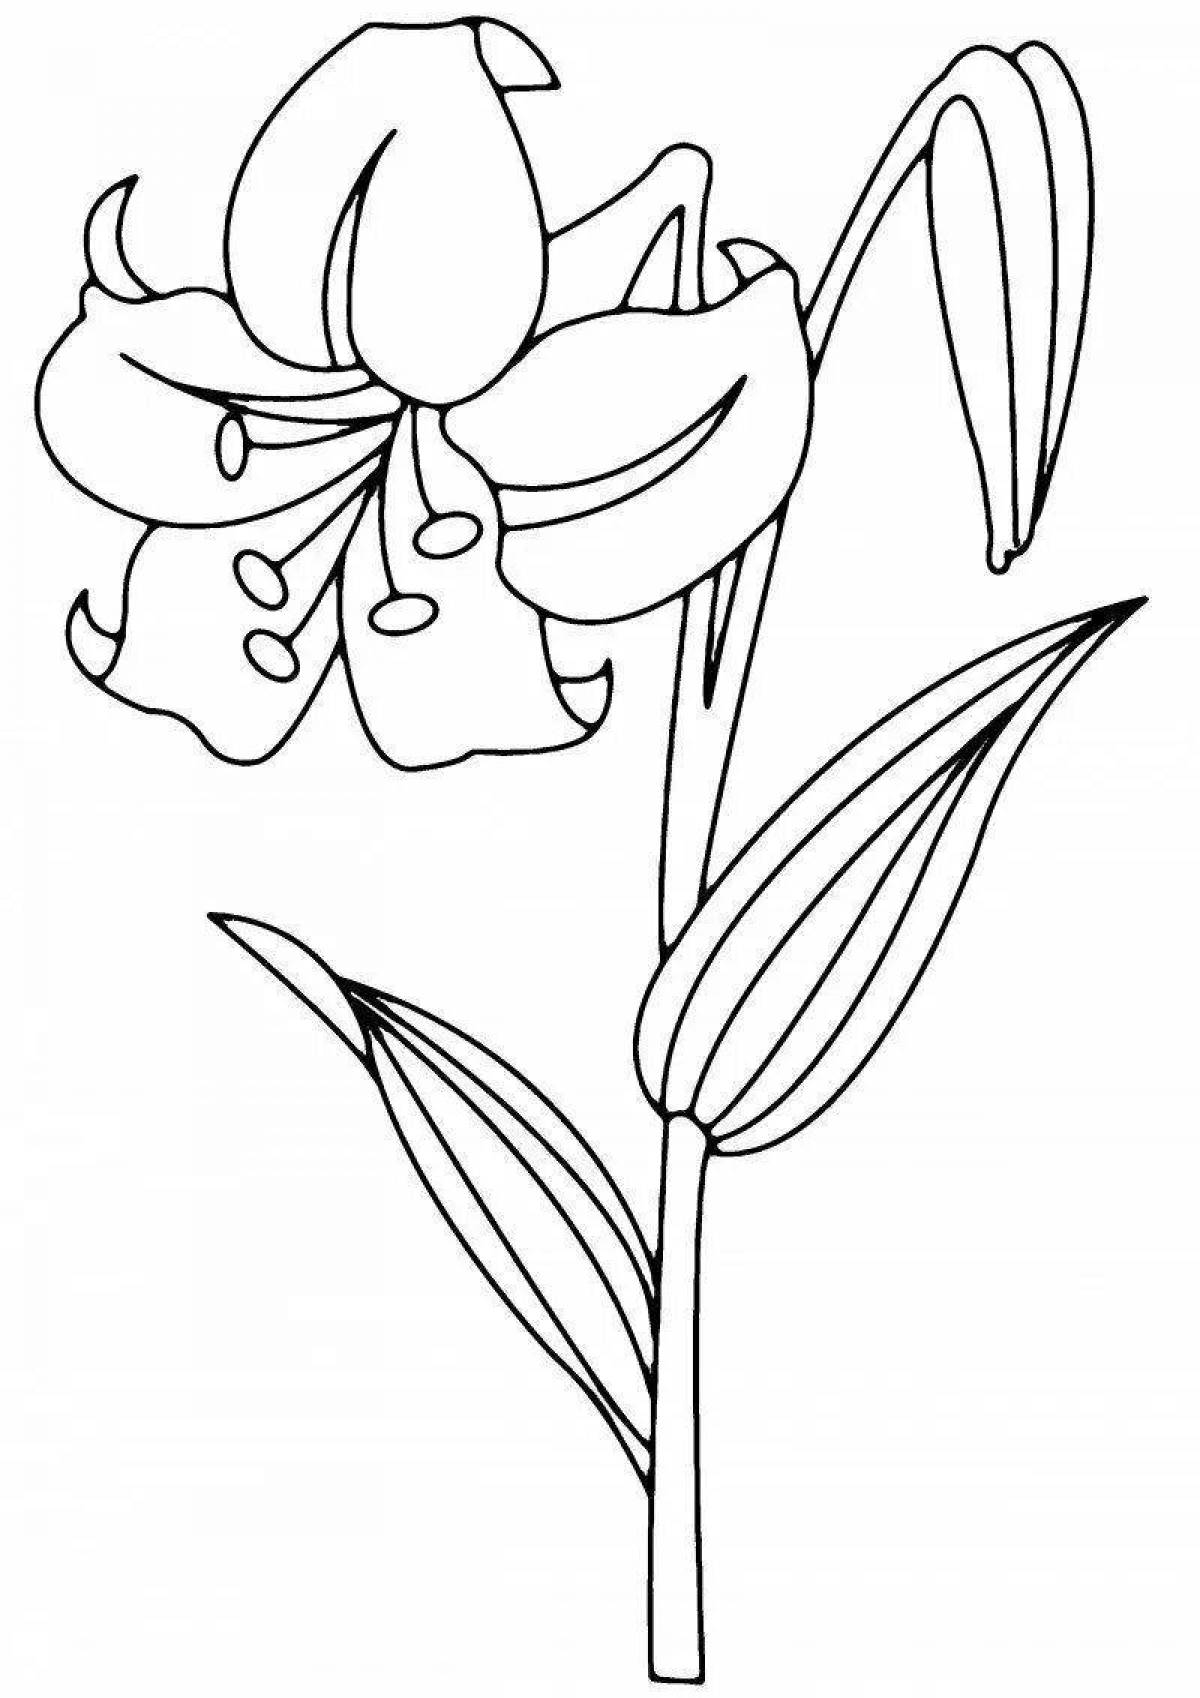 Playful lily coloring pages for kids